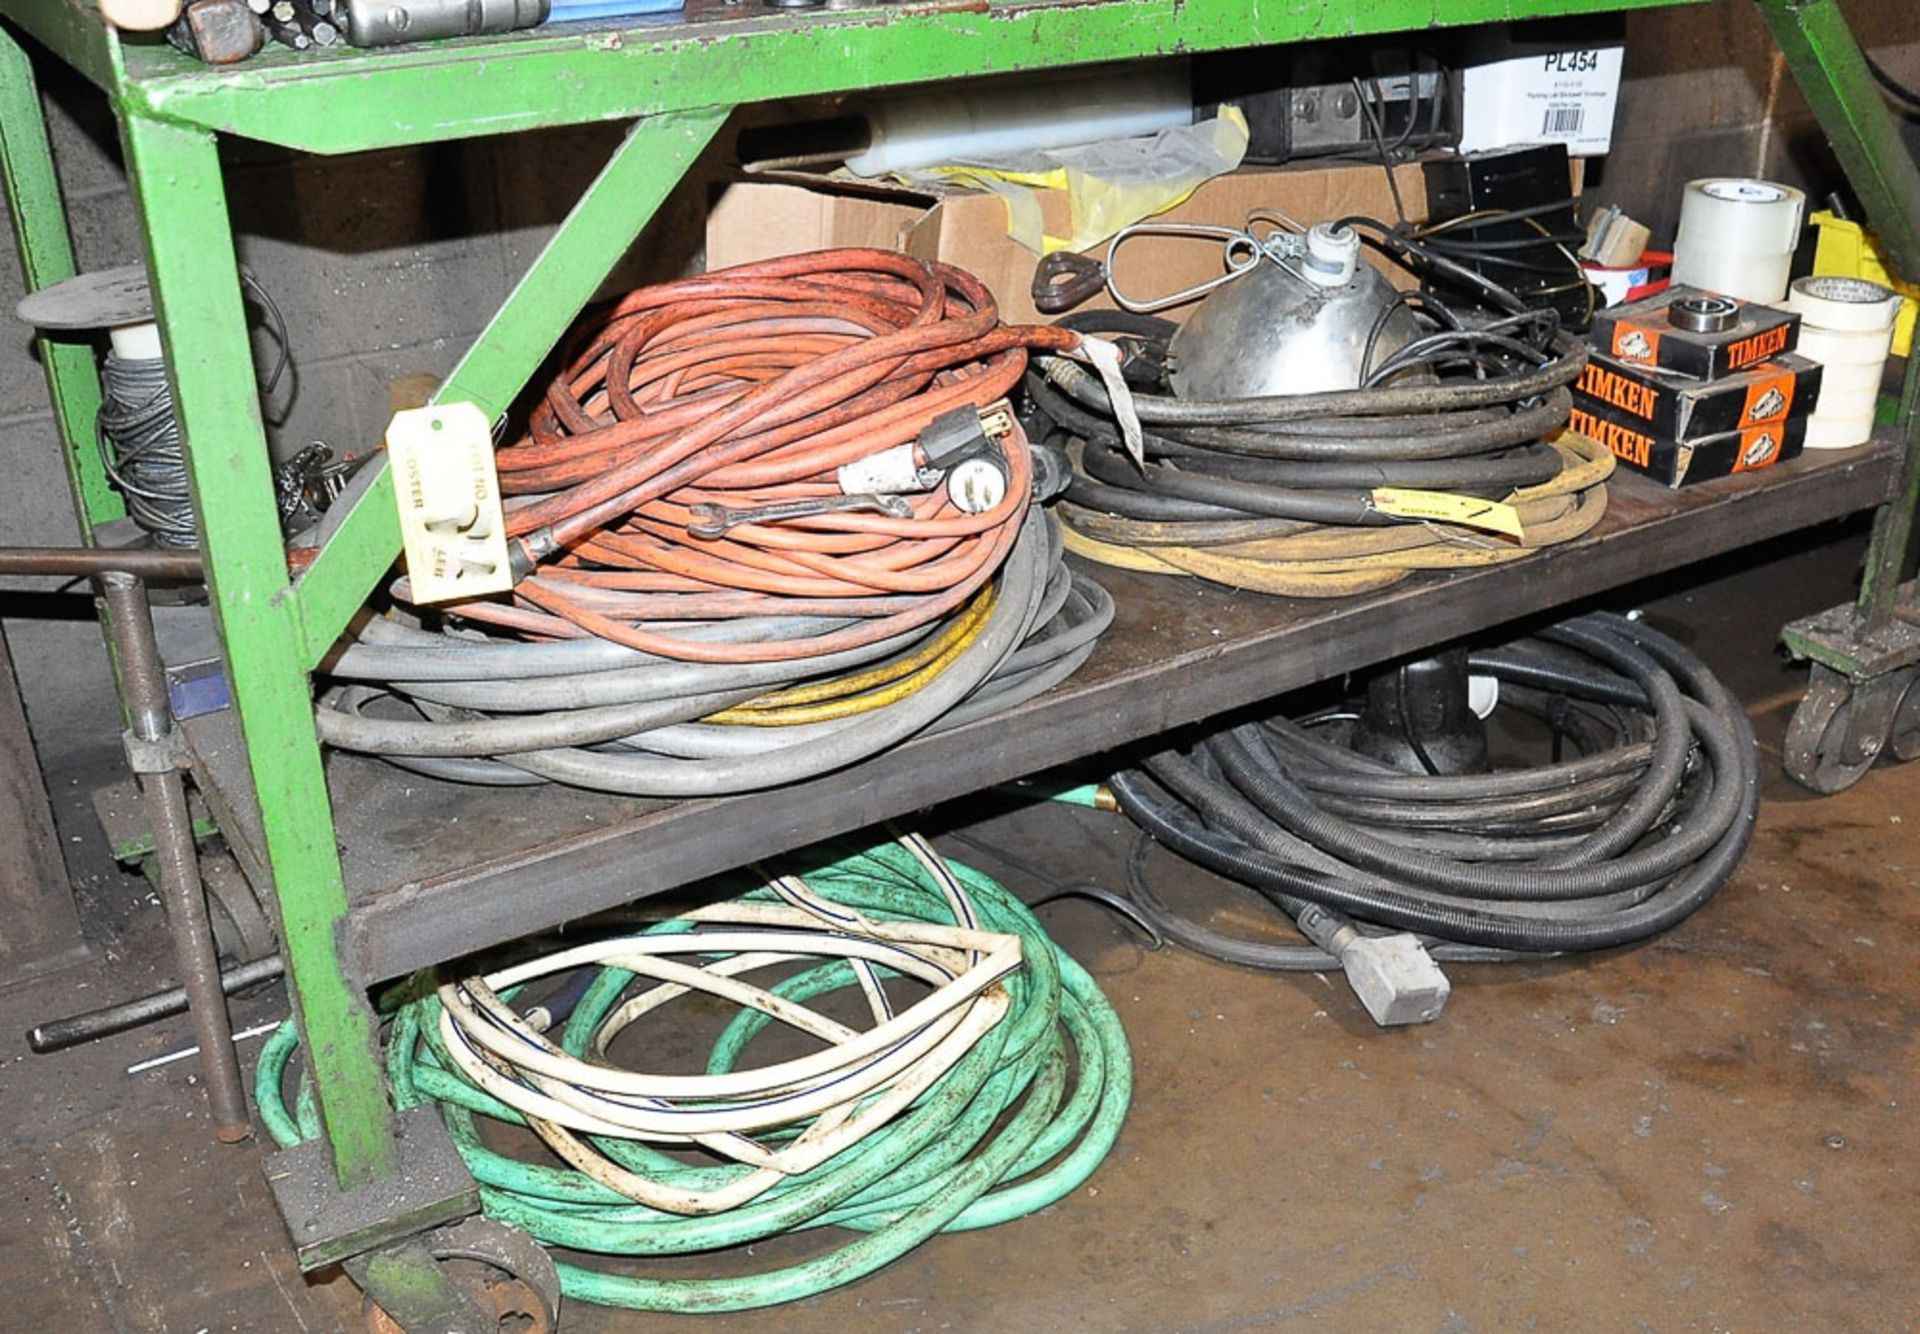 LOT OF EXTENSION CORDS, AIR HOSE, BEARINGS & SHIPPING SUPPLIES (UNDER BENCH)